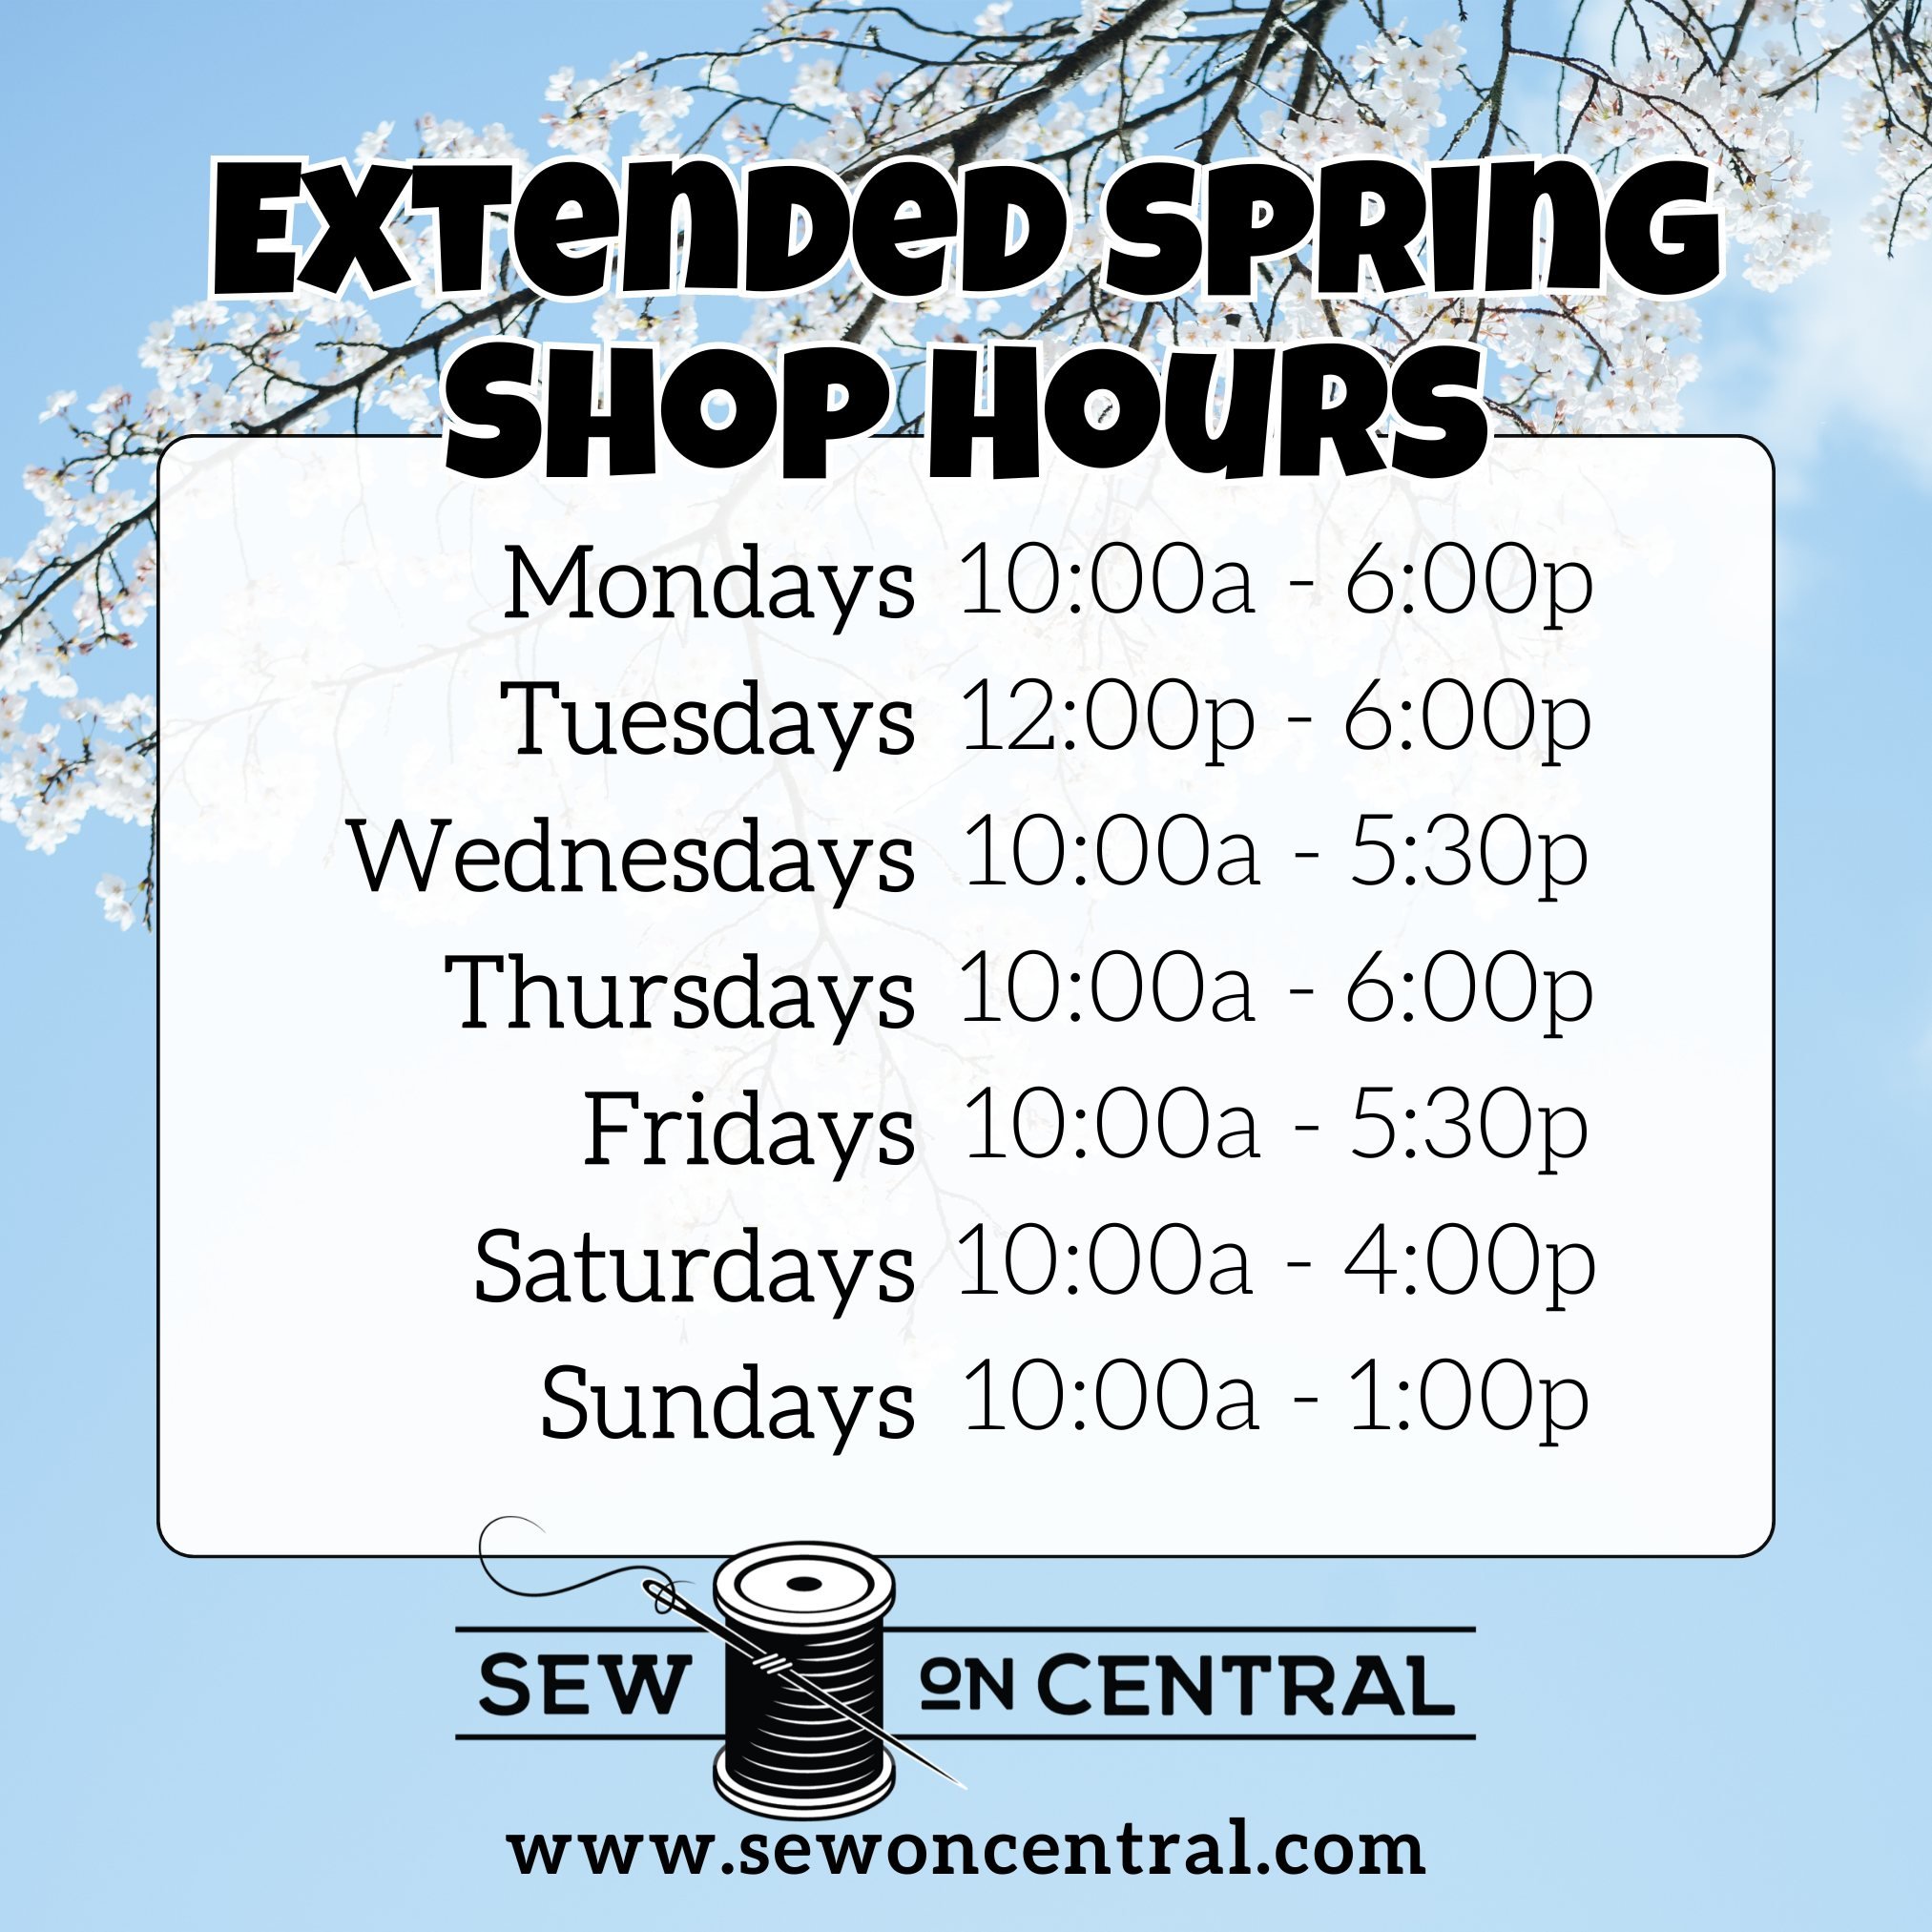 We've extended our shop hours for spring! 🌷 Stop in, say hi, and browse our gorgeous fabric collection, extensive pattern selection, embroidery kits, notions, and more! Or shop online anytime at sewoncentral.com. 🧵✂🧷

 #sewoncentral #evanstonillin